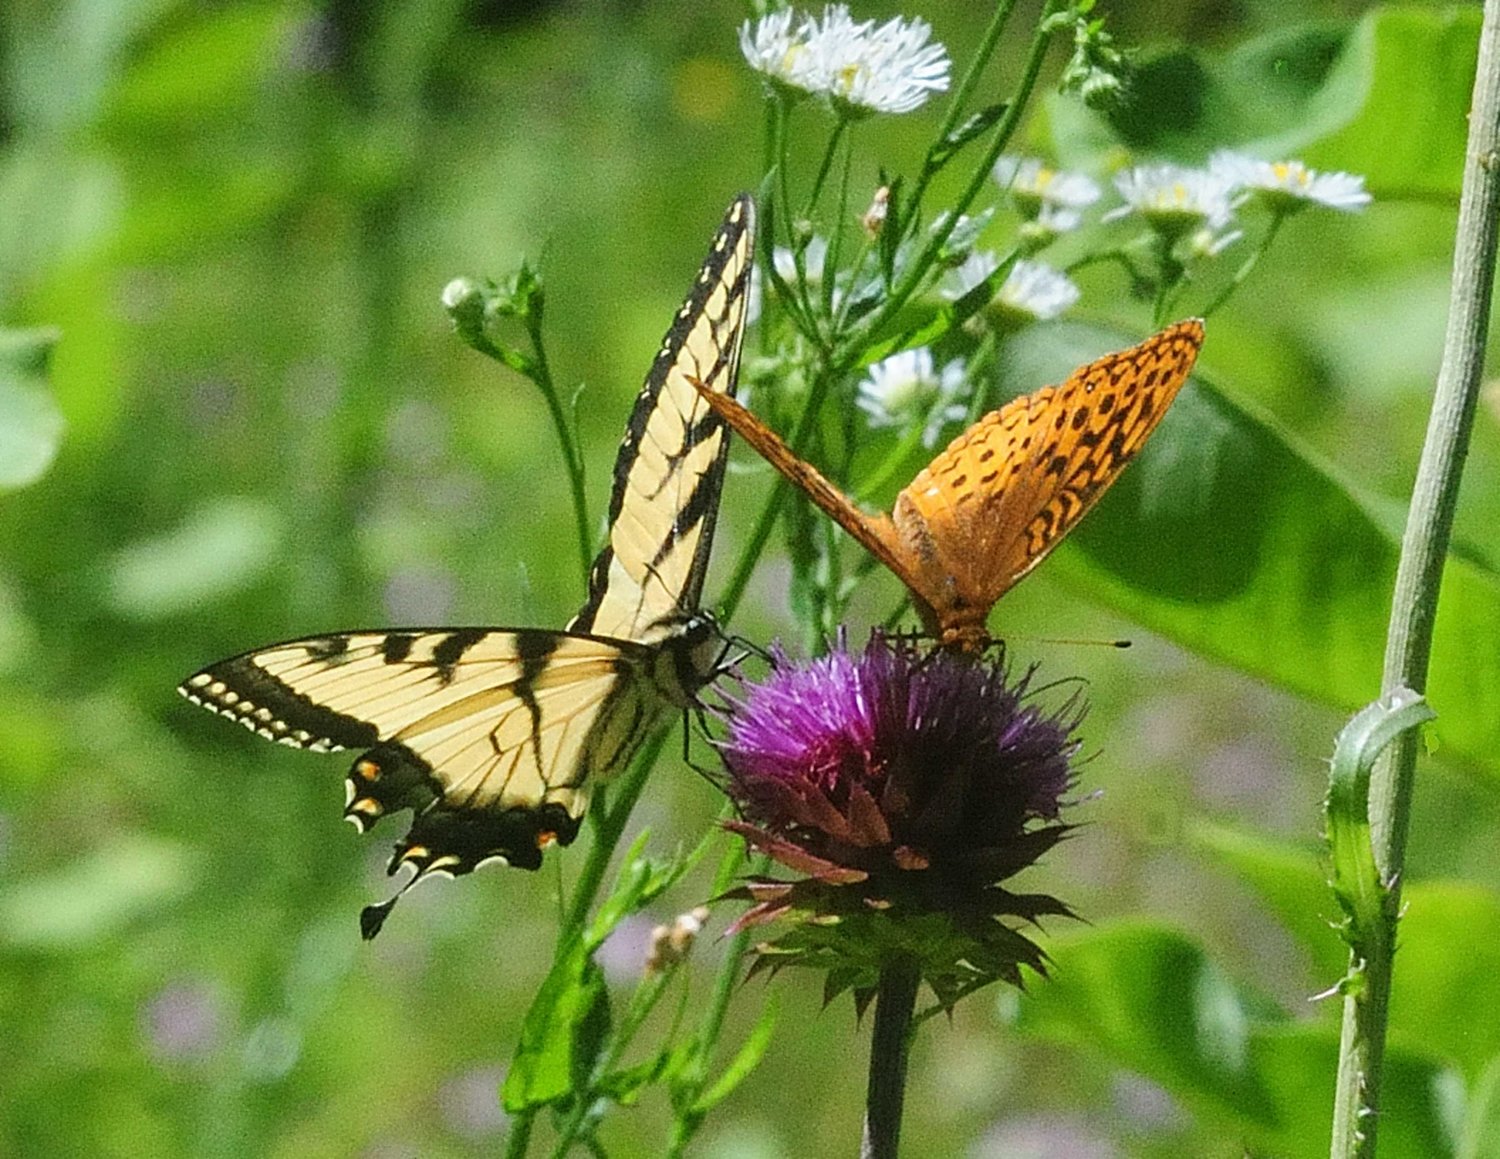 Along the same trail, a tiger swallowtail was found sharing space on a thistle flower with a great spangled fritillary. Two or more butterflies are frequently seen on the same flower and there is usually no conflict. The various species of fritillaries are orange in color and are frequently mistaken for monarchs from a distance. The fritillary’s flight, however, is faster and more erratic than a monarch butterfly.